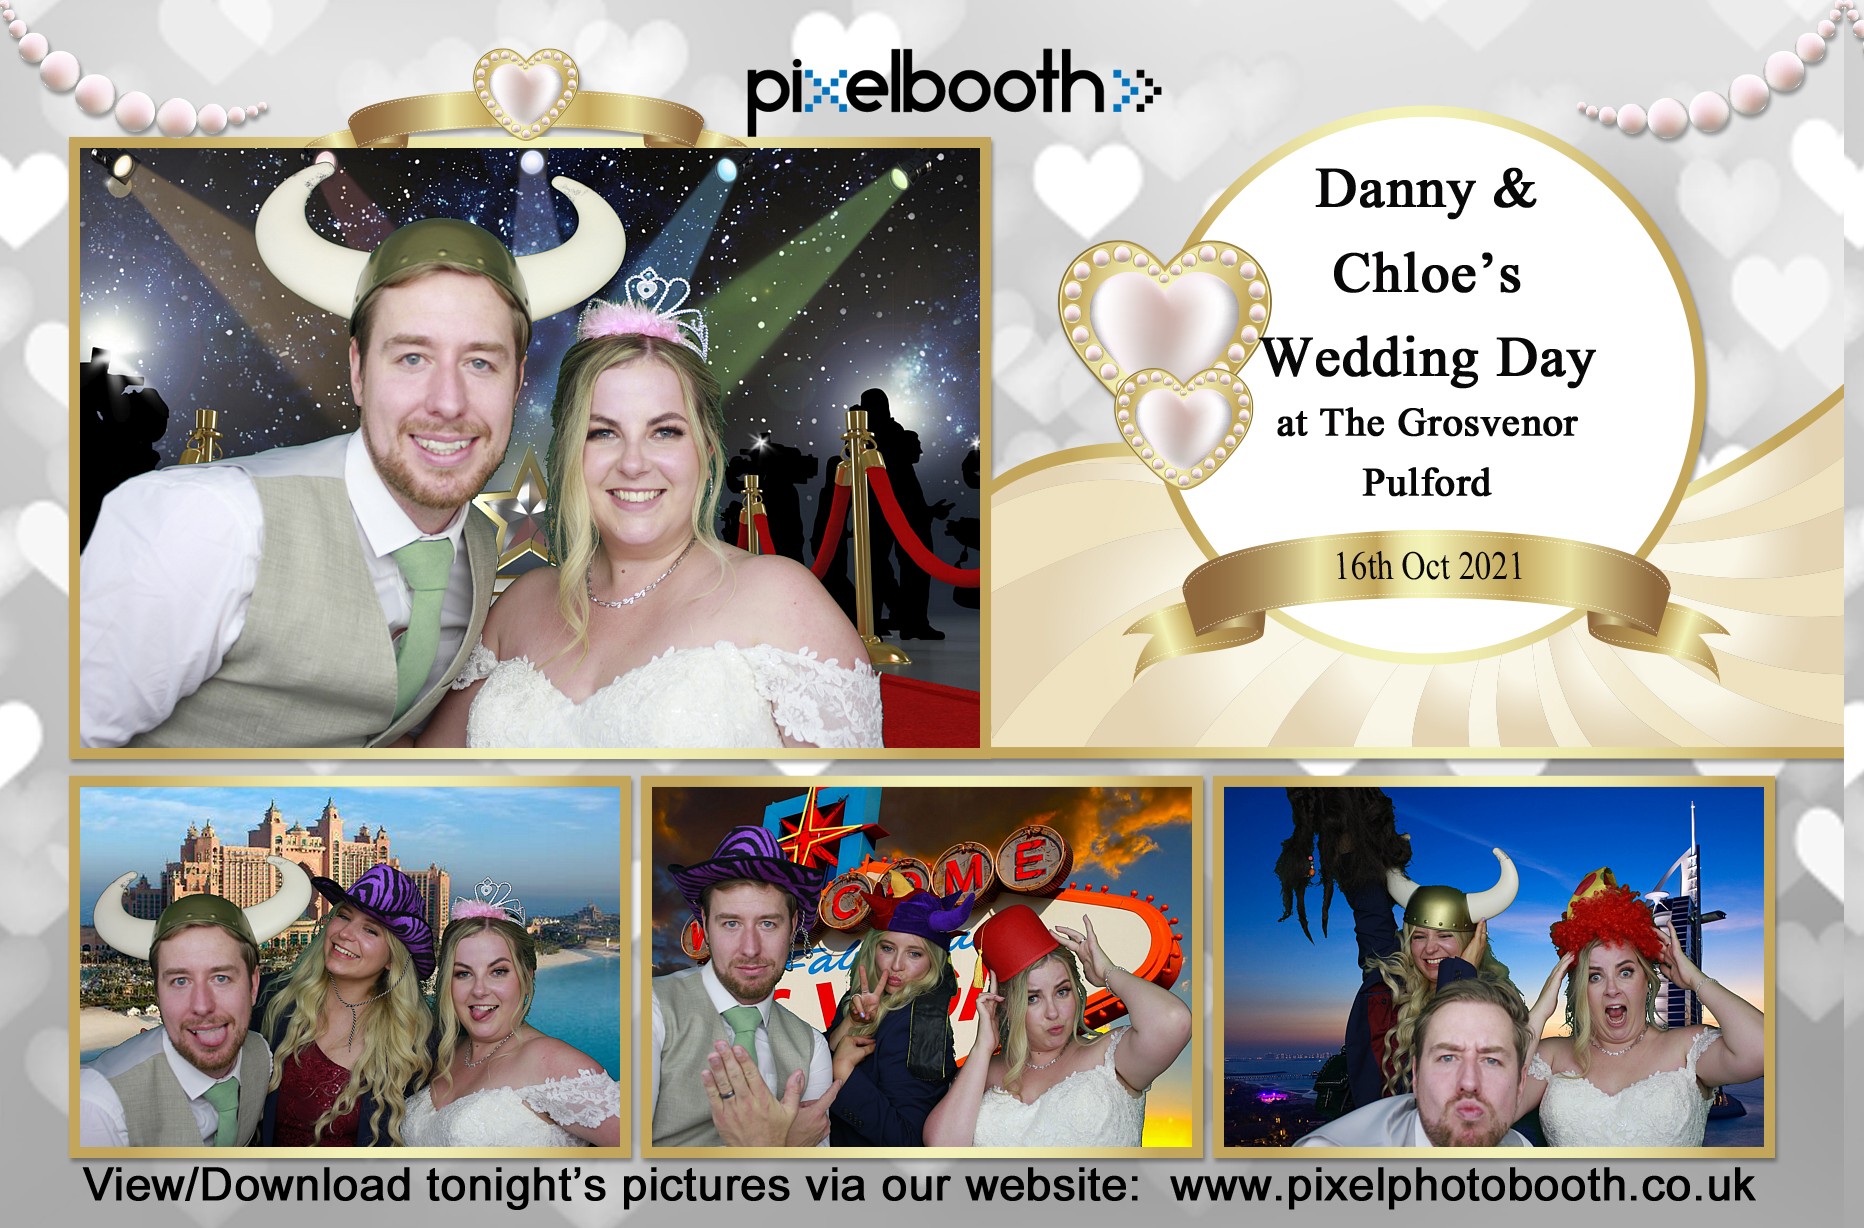 16th Oct 2021: Danny and Chloe's Wedding at The Grosvenor Pulford